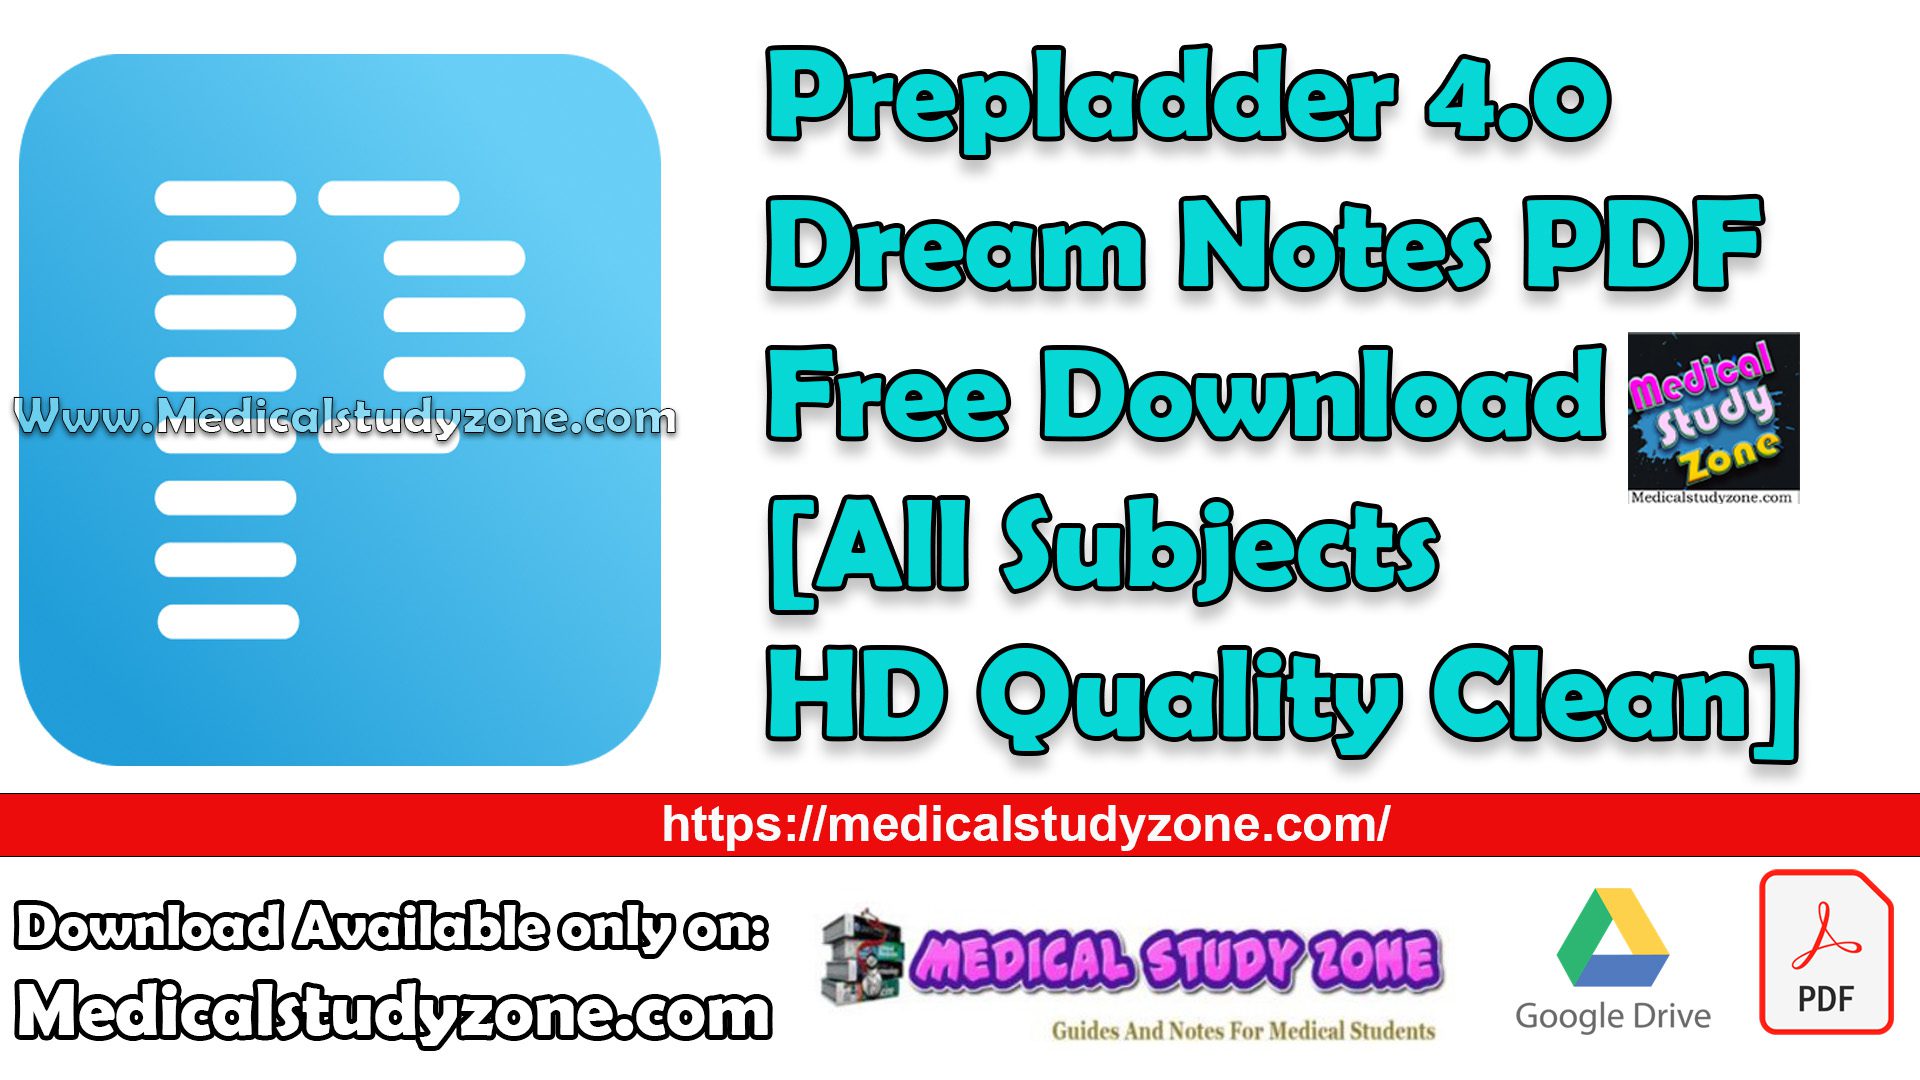 Prepladder 4.0 Dream Notes PDF Free Download [All Subjects HD Quality Clean]